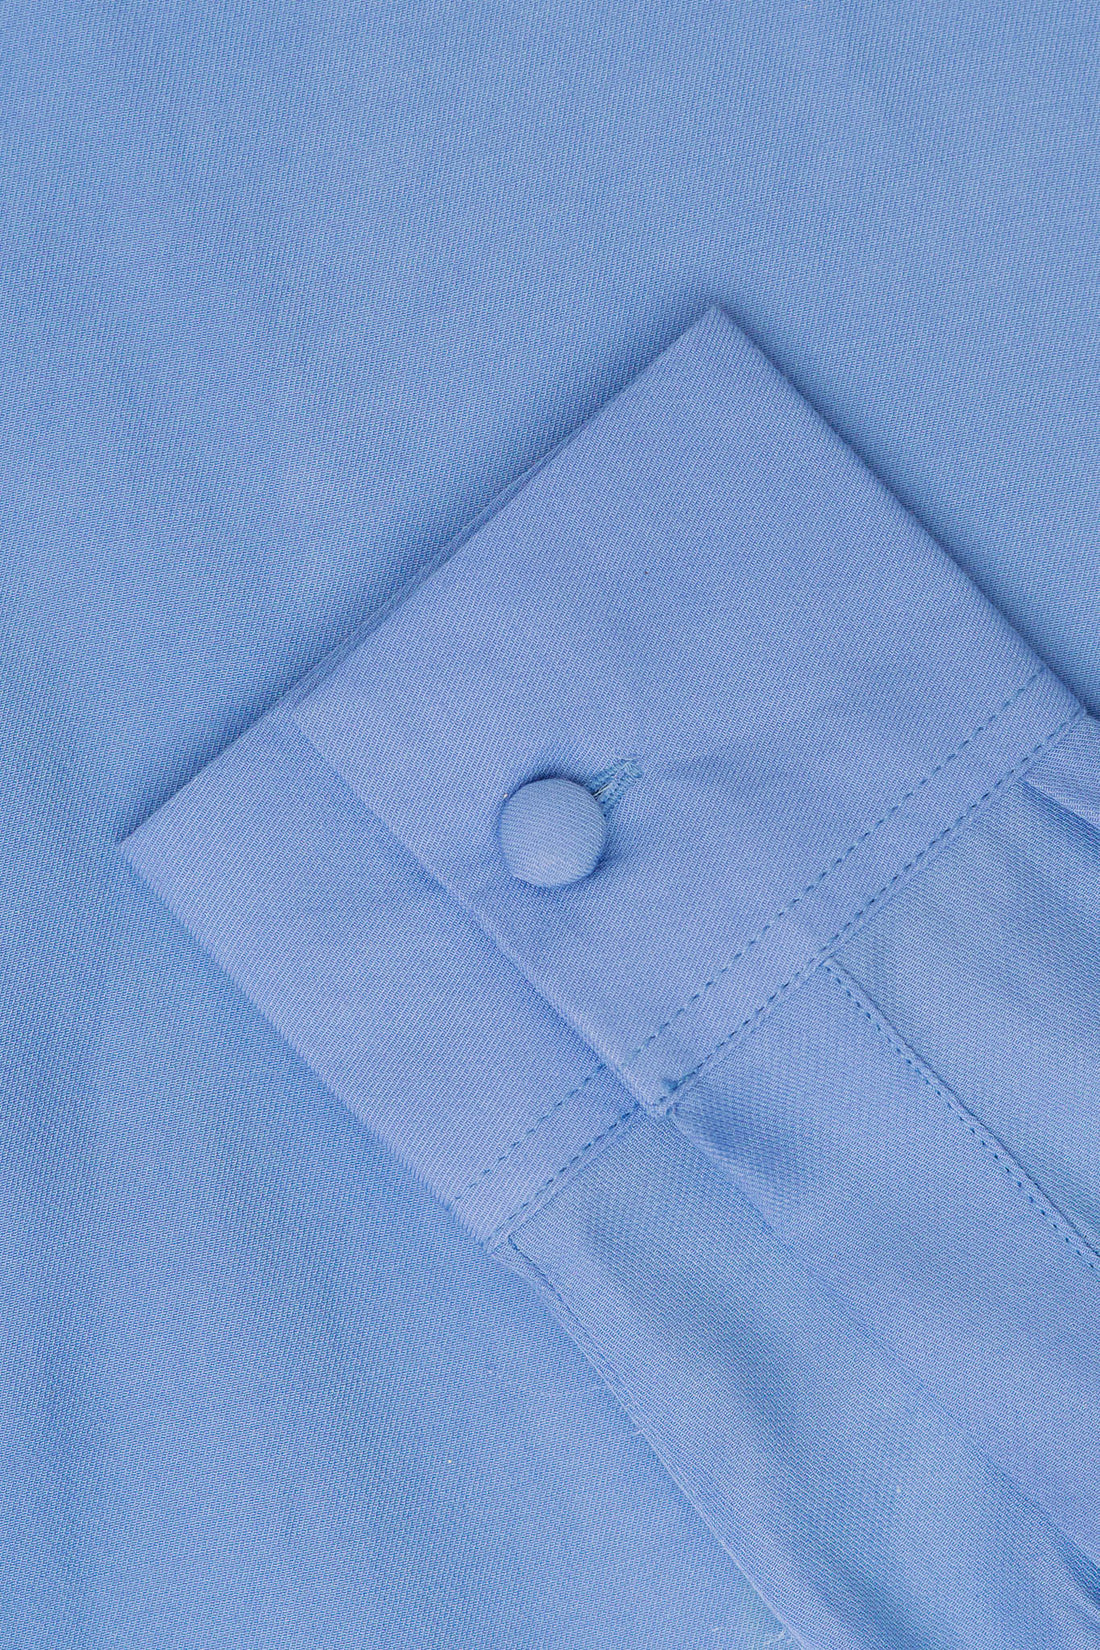 A close up of blue fabric and a blue button